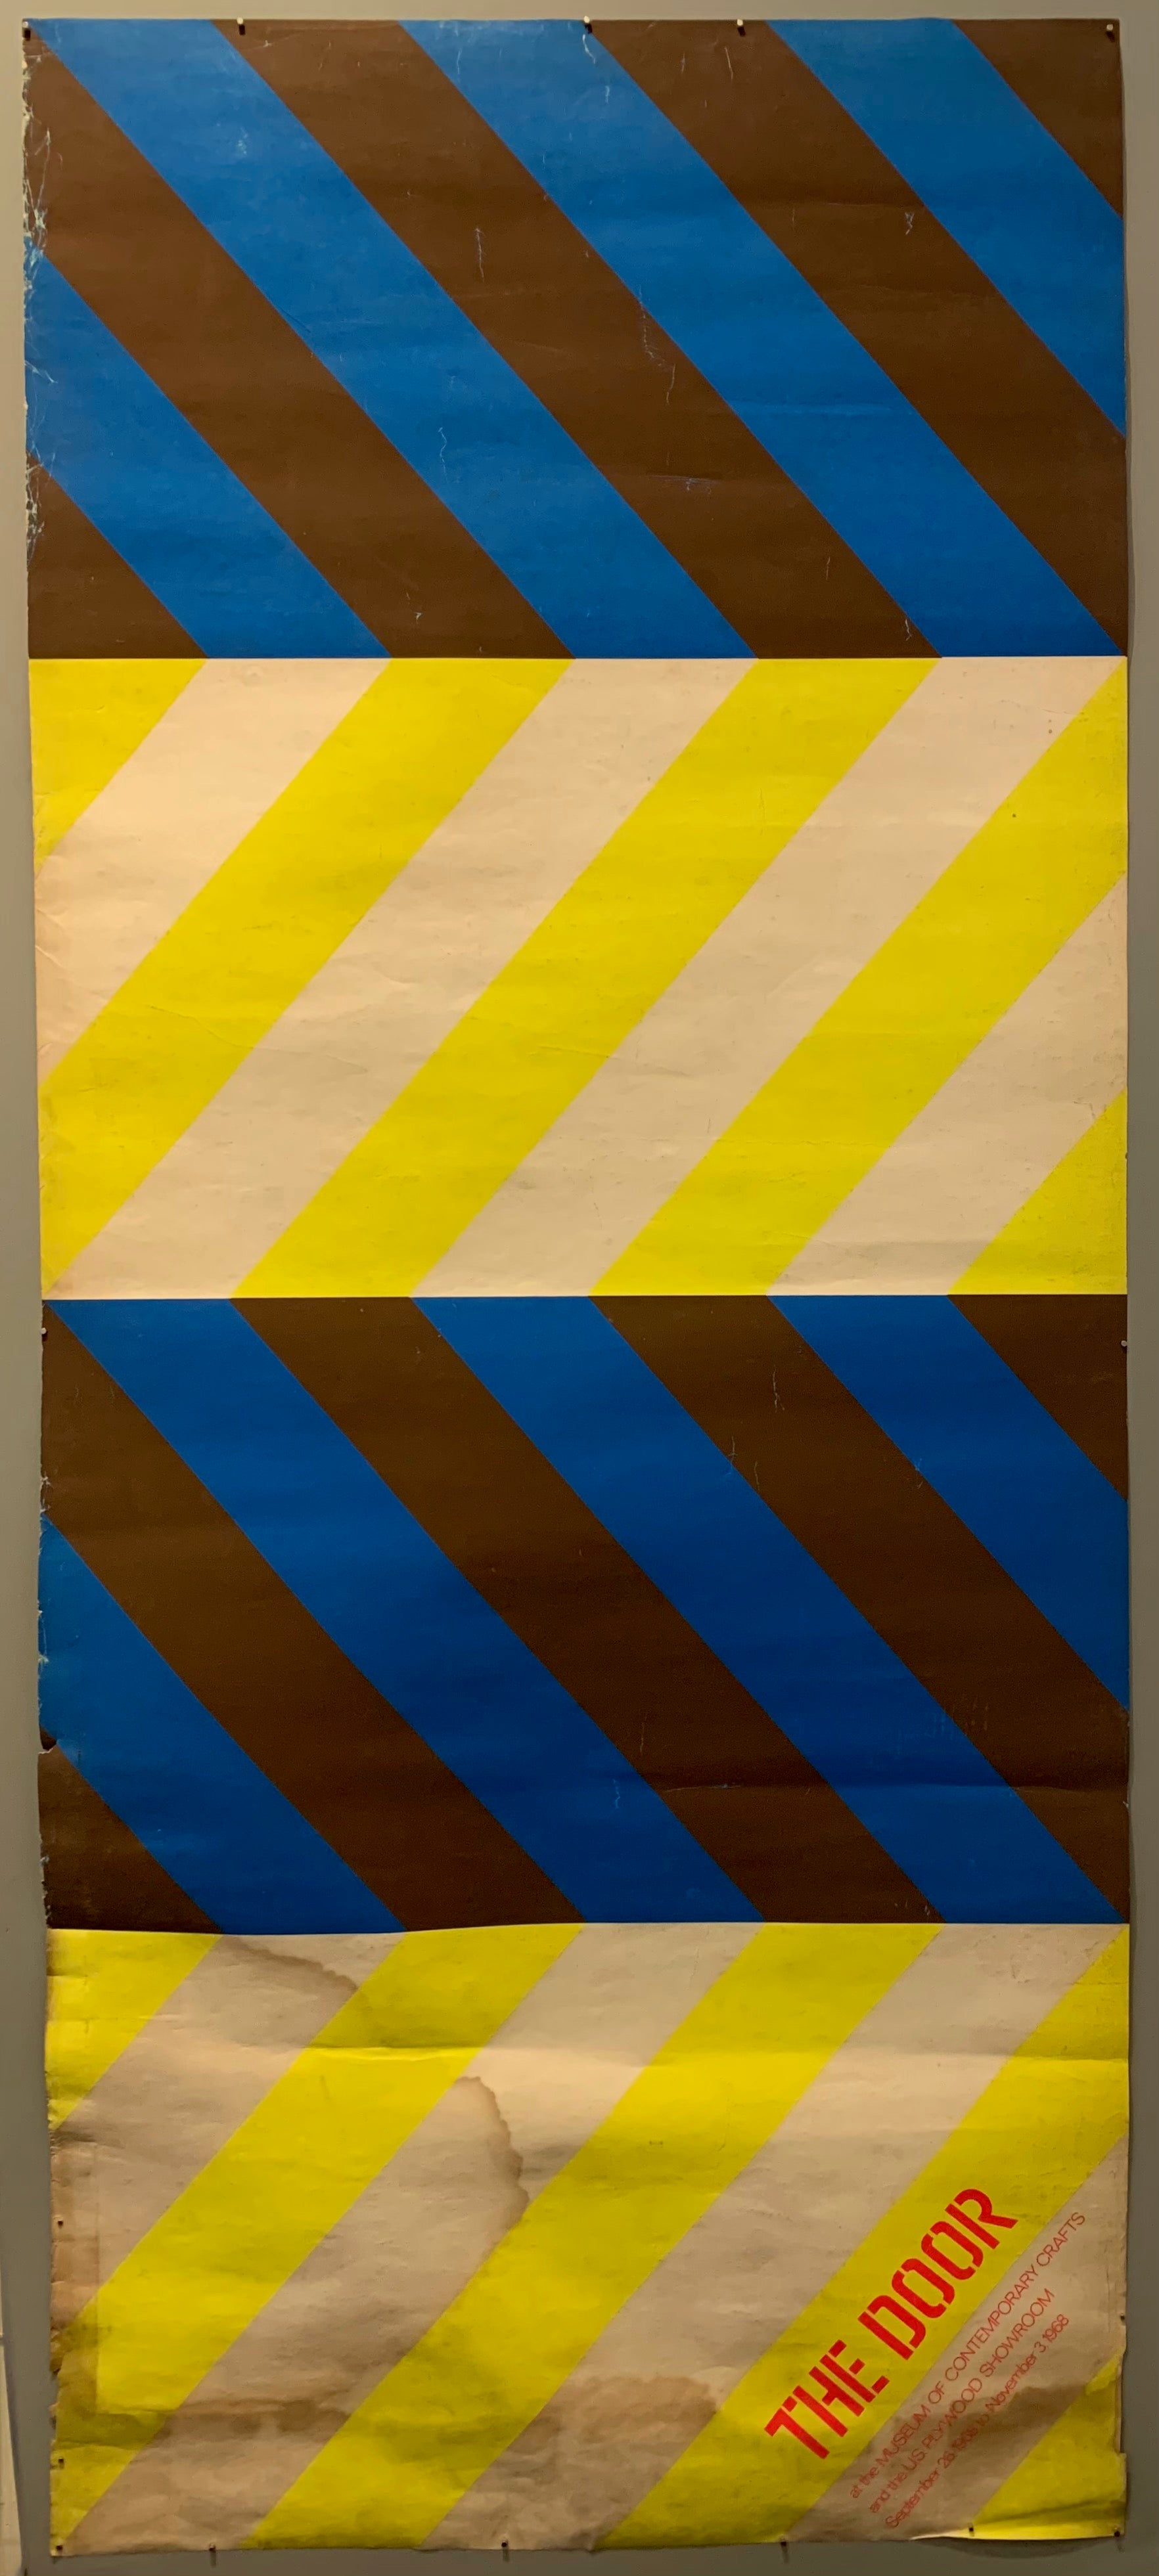 This mix of multicolored diagonals is eye-catching and bold and creates a chevron print. The main colors are yellow and white and black and blue.